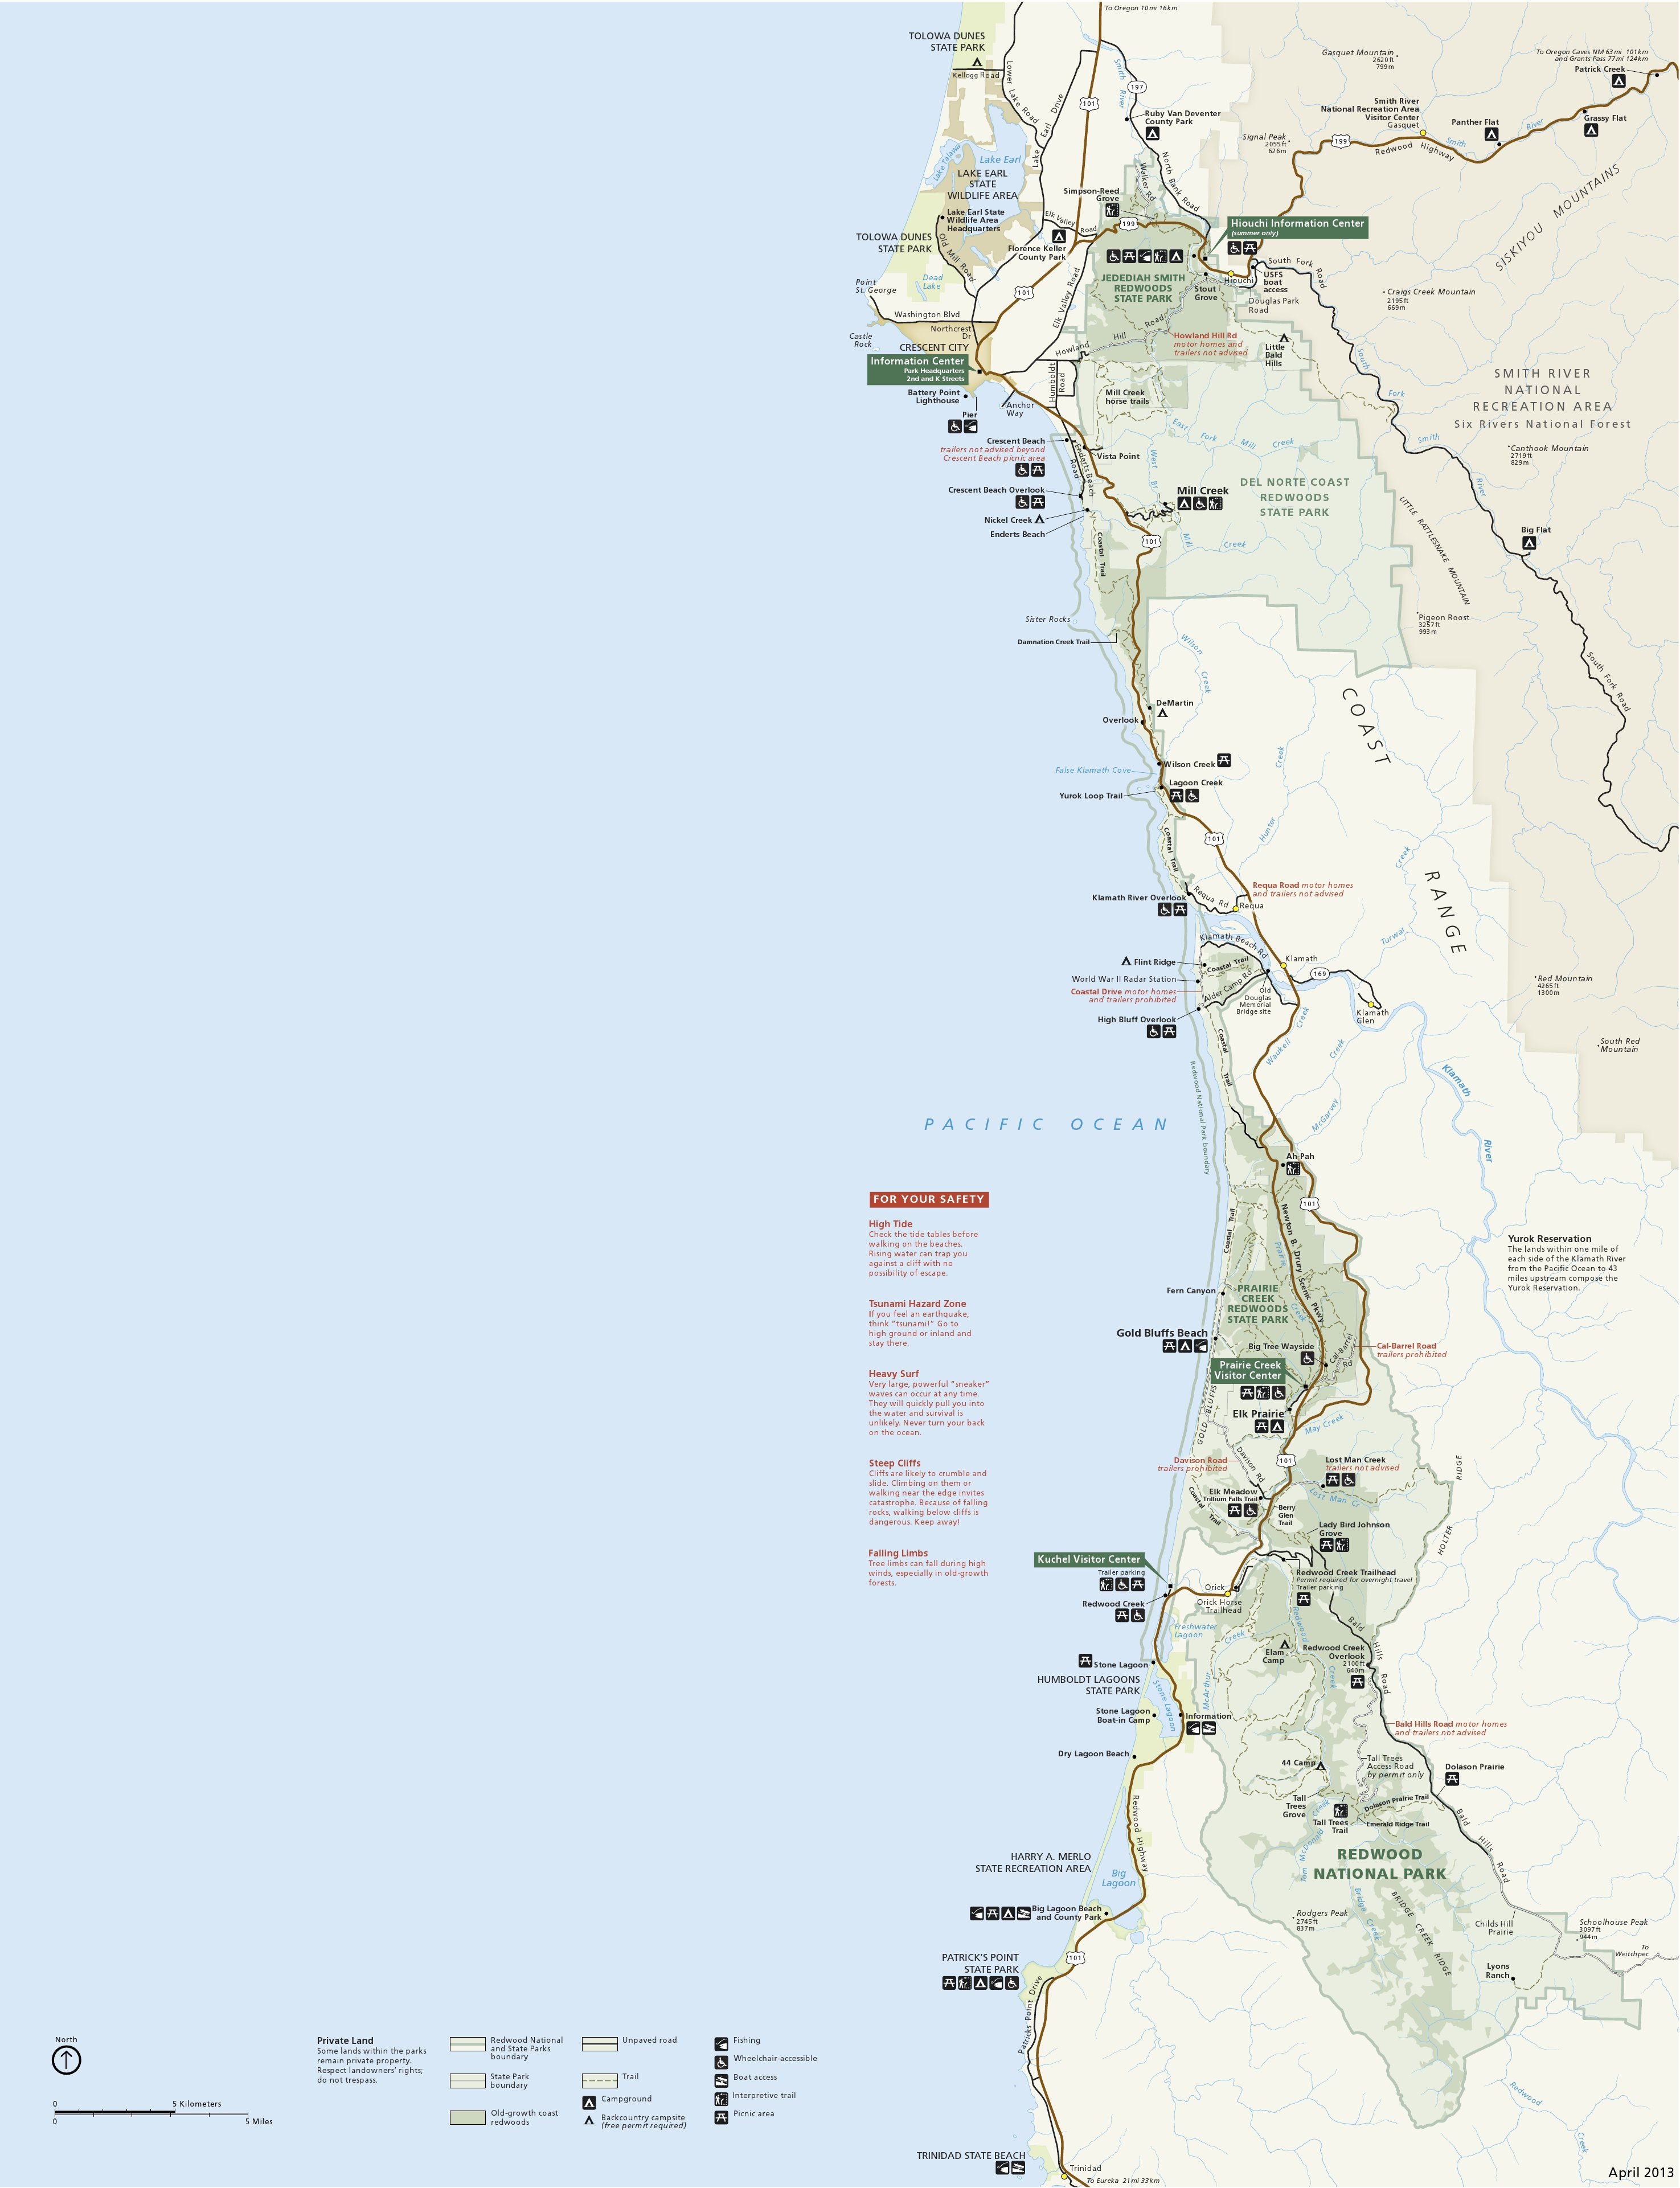 Redwood Maps | Npmaps - Just Free Maps, Period. - Redwoods Northern California Map